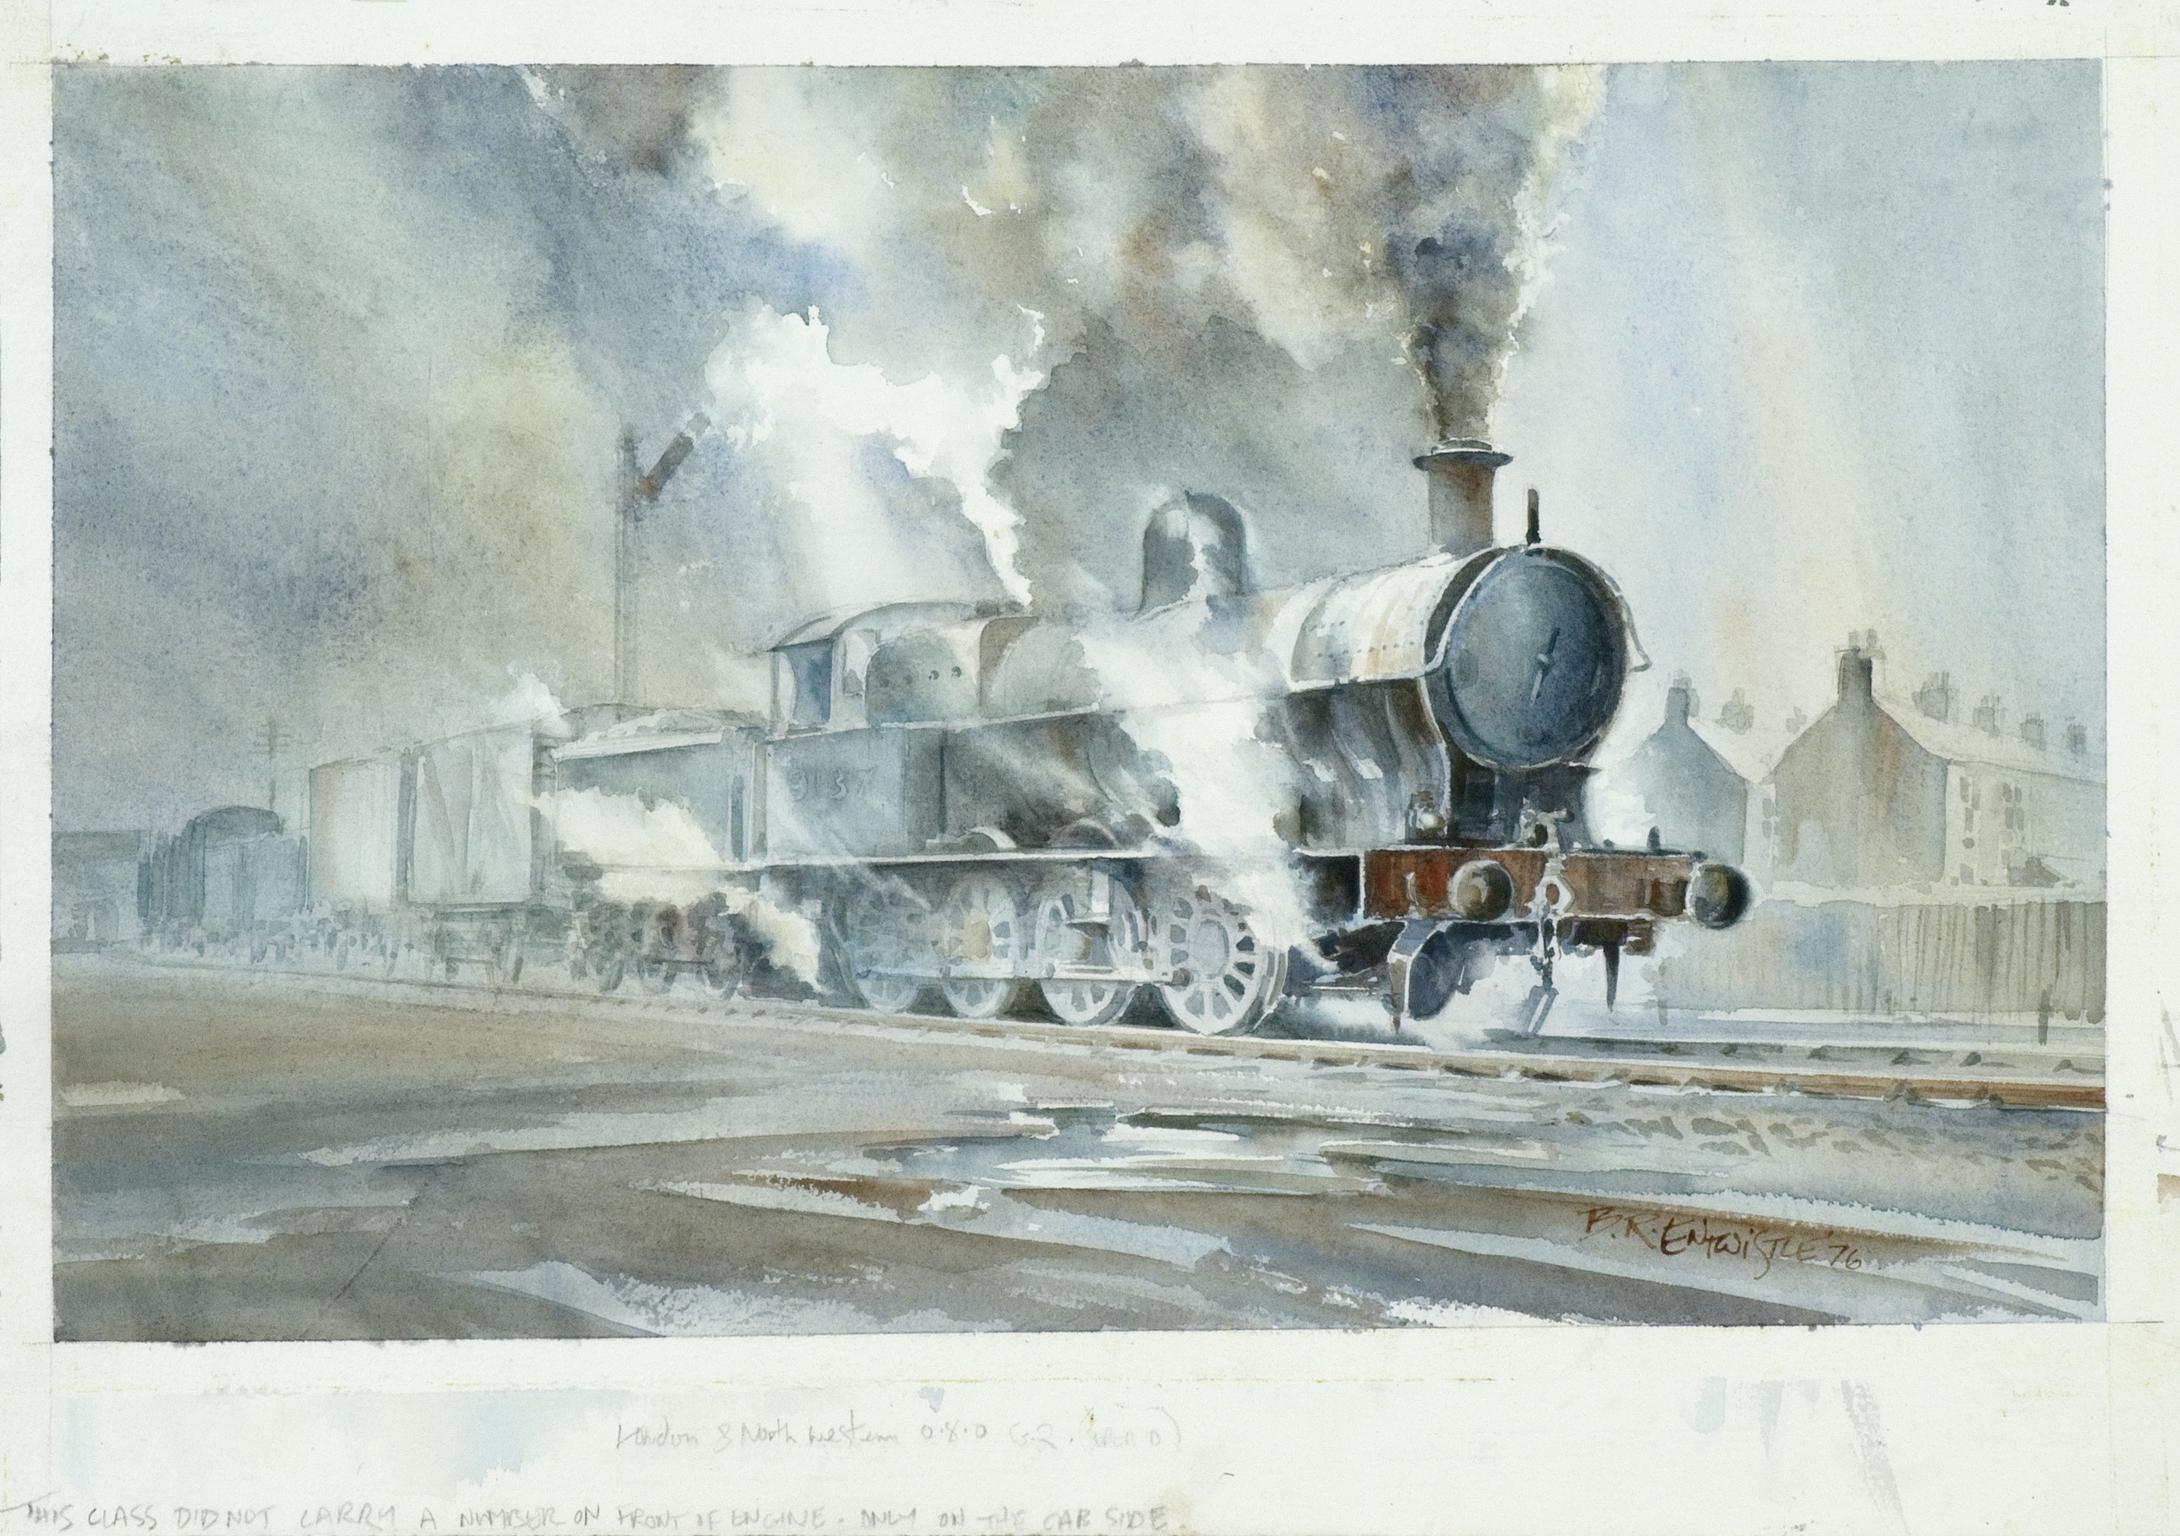 Freight Train Headed by 0-8-0 Locomotive Number '49137' of the L.N.W.R. in North Wales (painting)